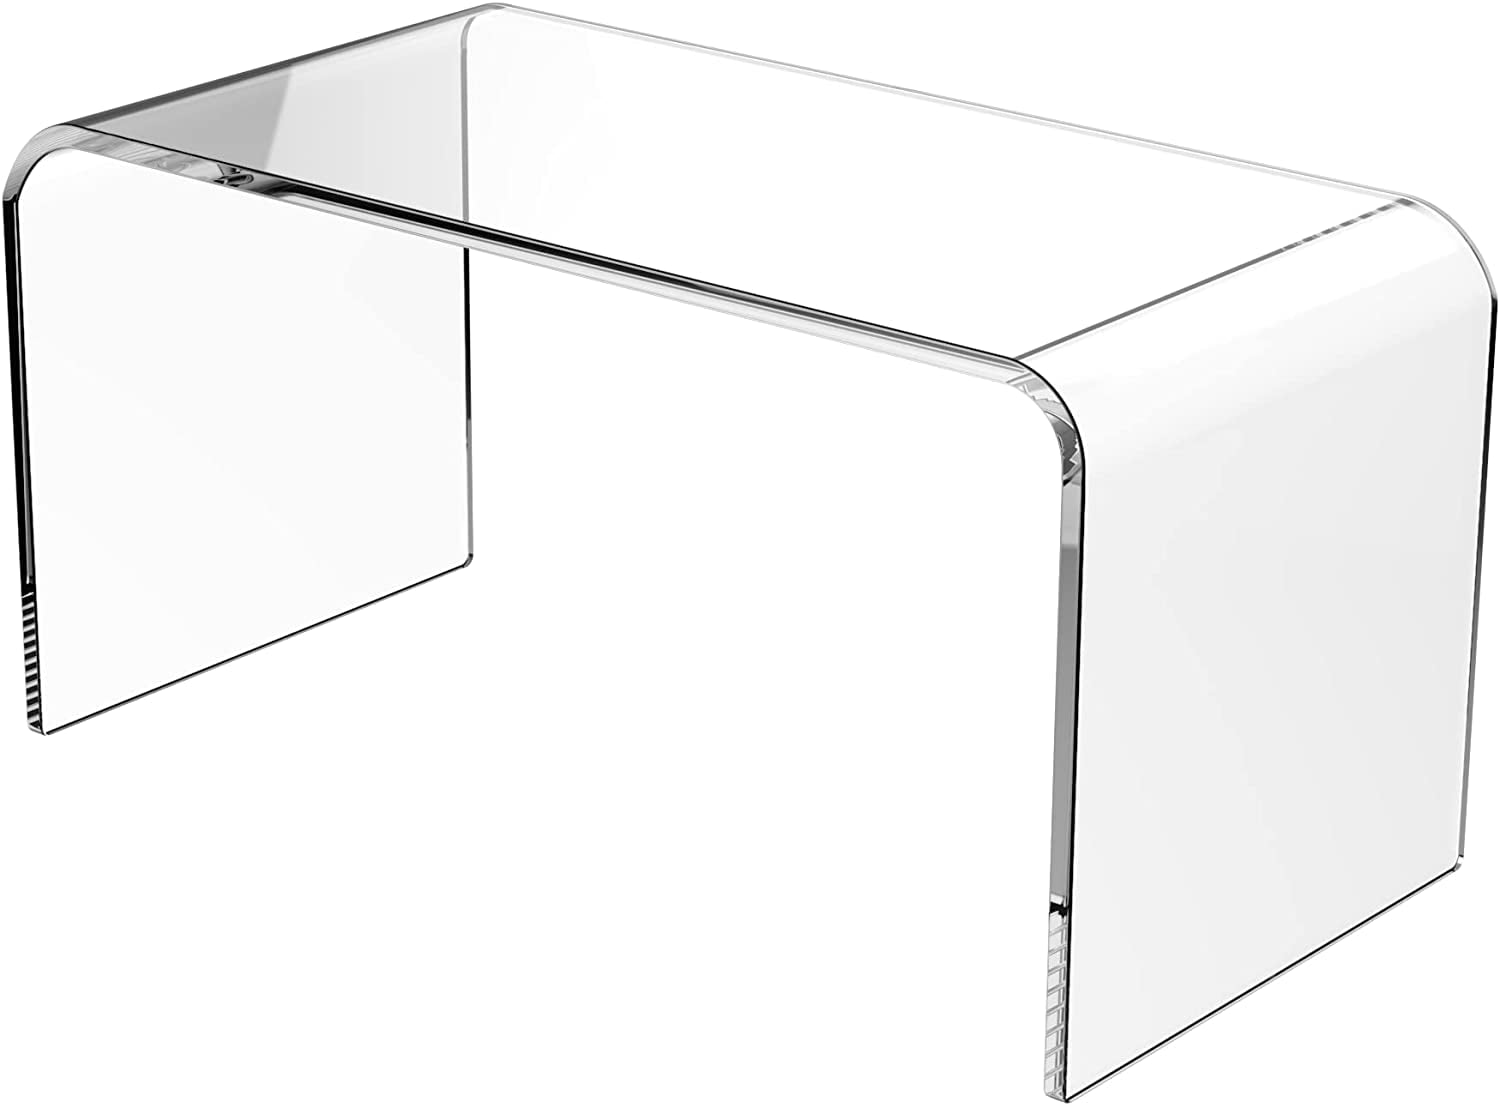 Homepraise Acrylic Coffee Table with PVC Cover Protector 32" Modern Waterfall Tea Table,3/5" Thick